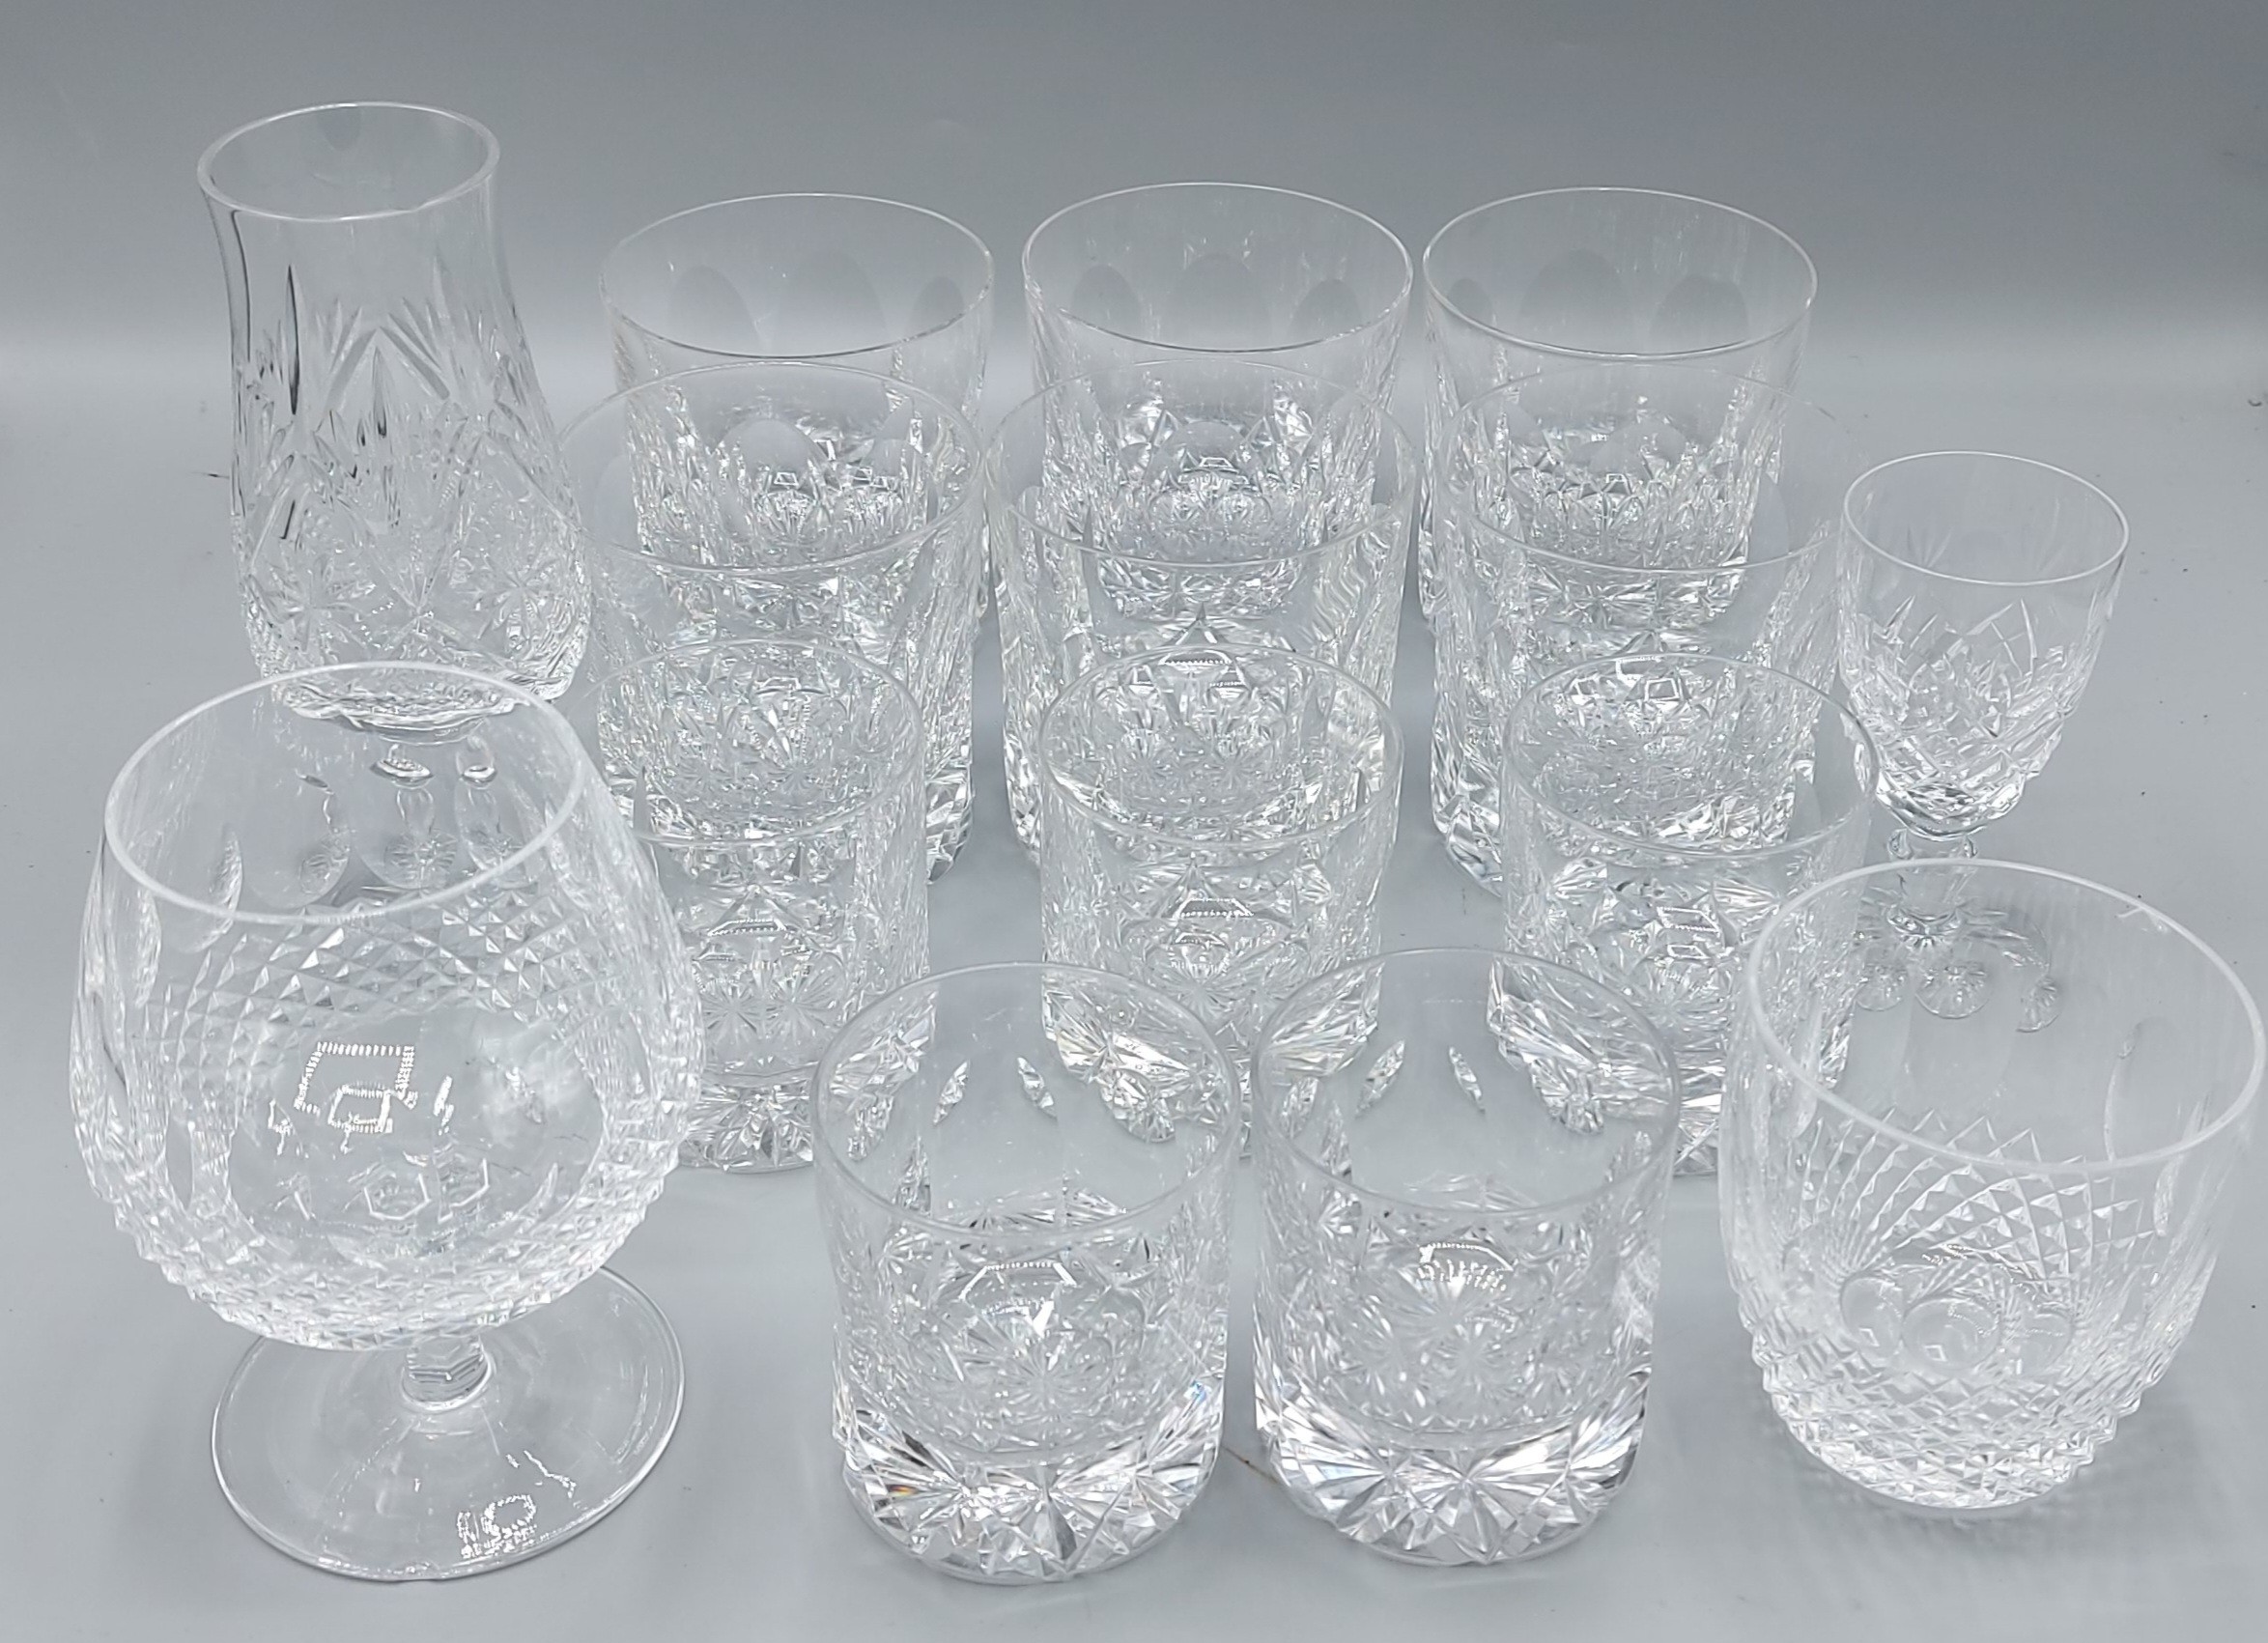 A set of six glass whiskey tumblers by Tudor together with five matching smaller glasses and four